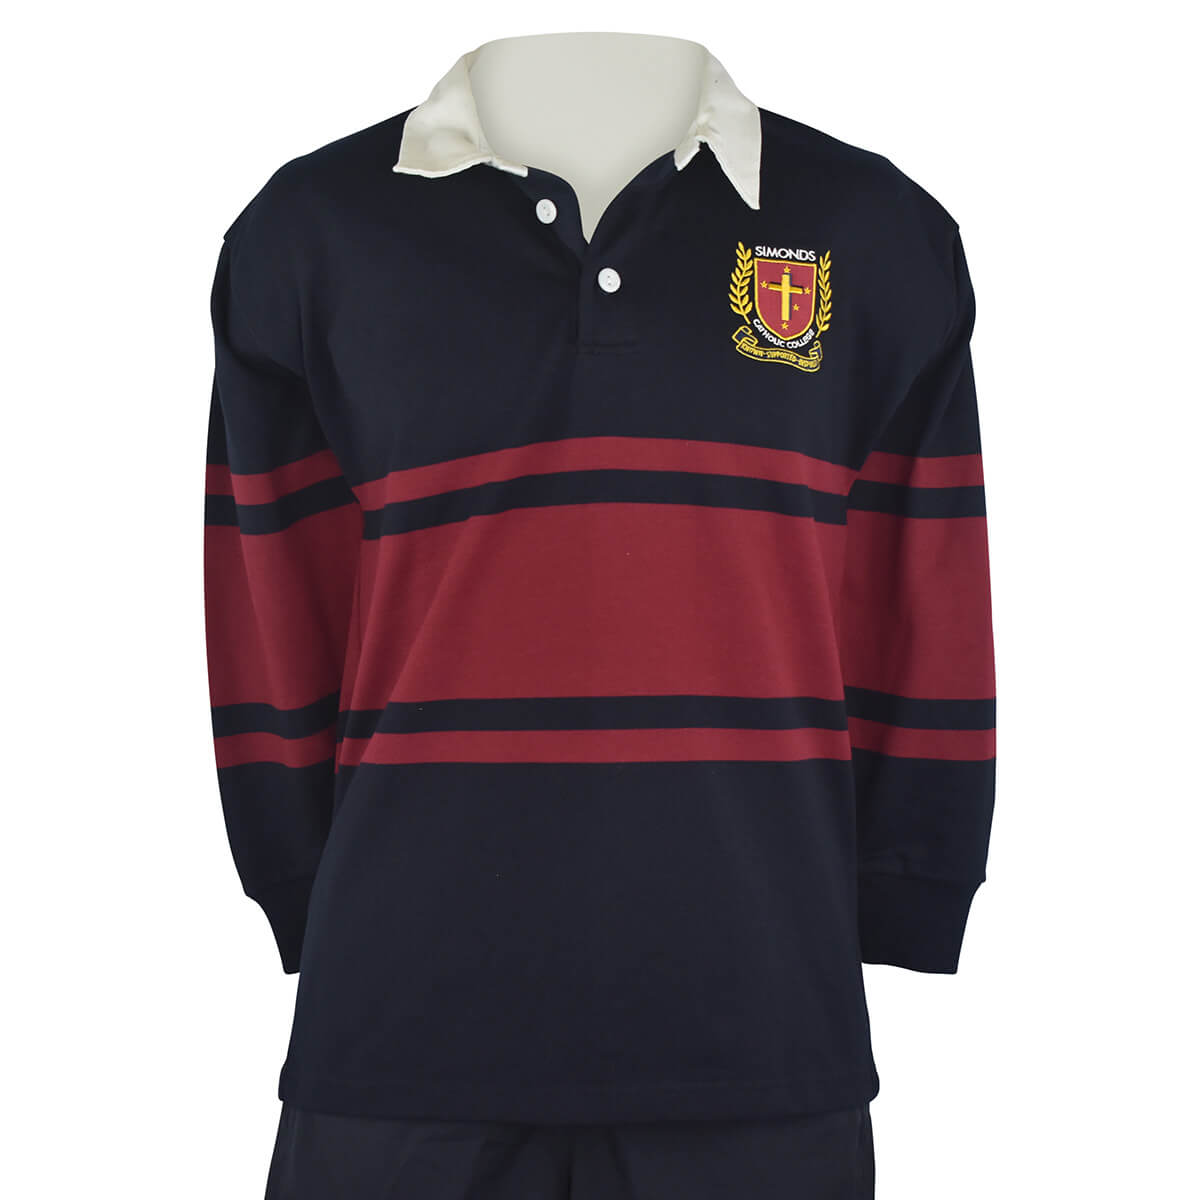 Simonds College Rugby Top | Simonds College | Noone